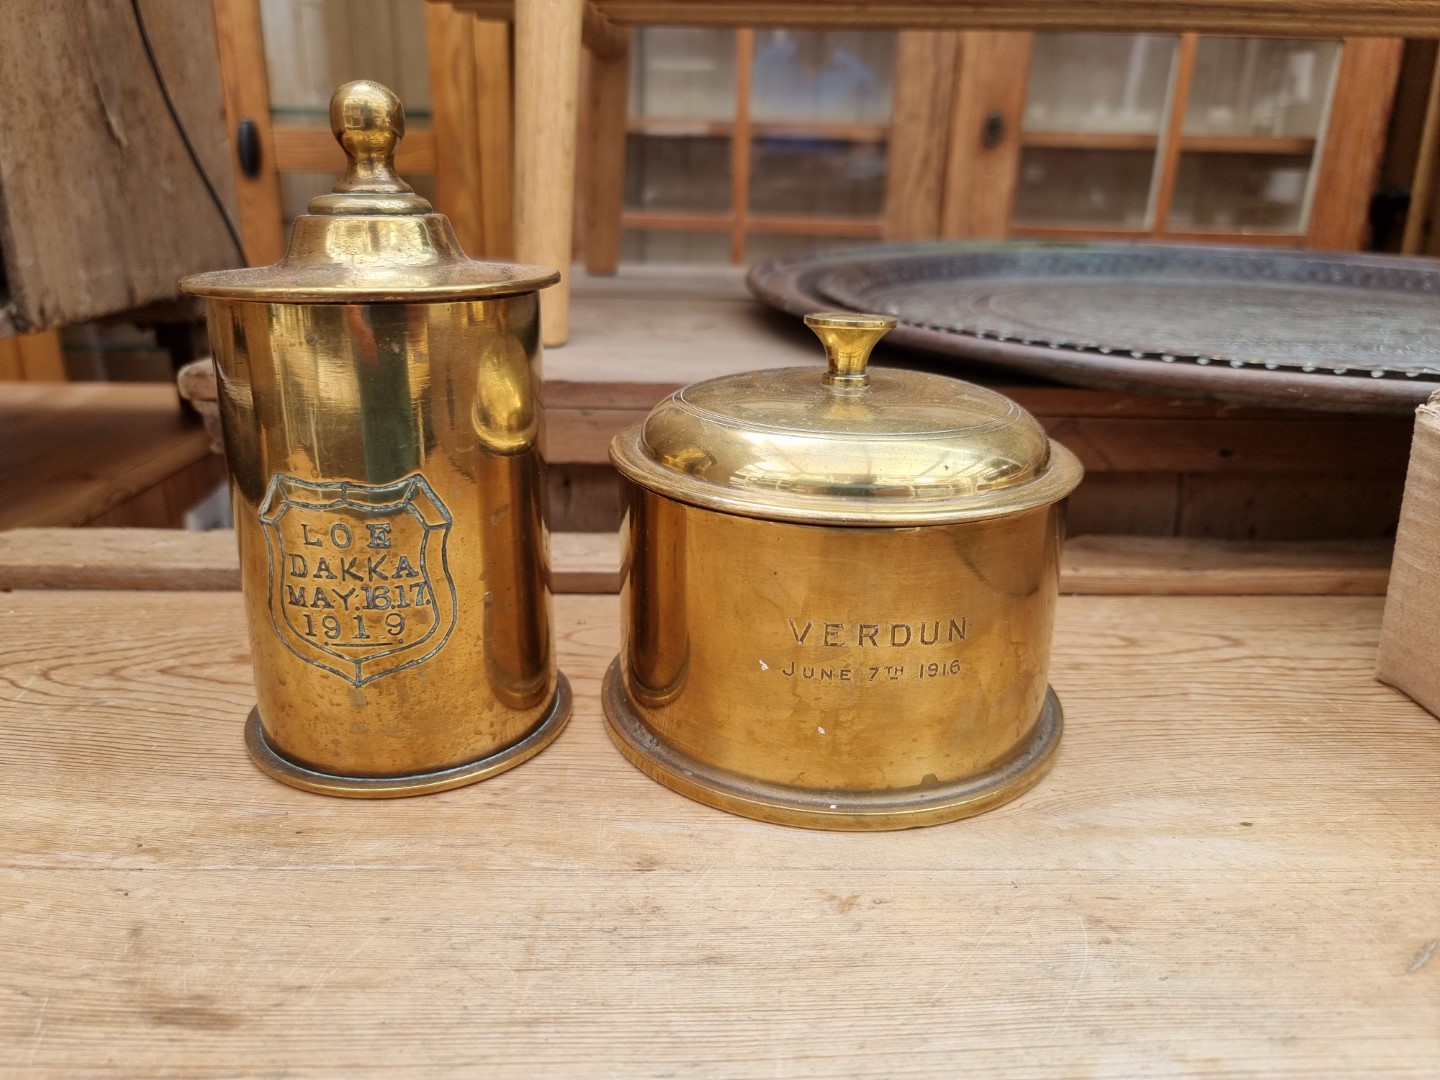 A small collection of trench art. - Image 2 of 4